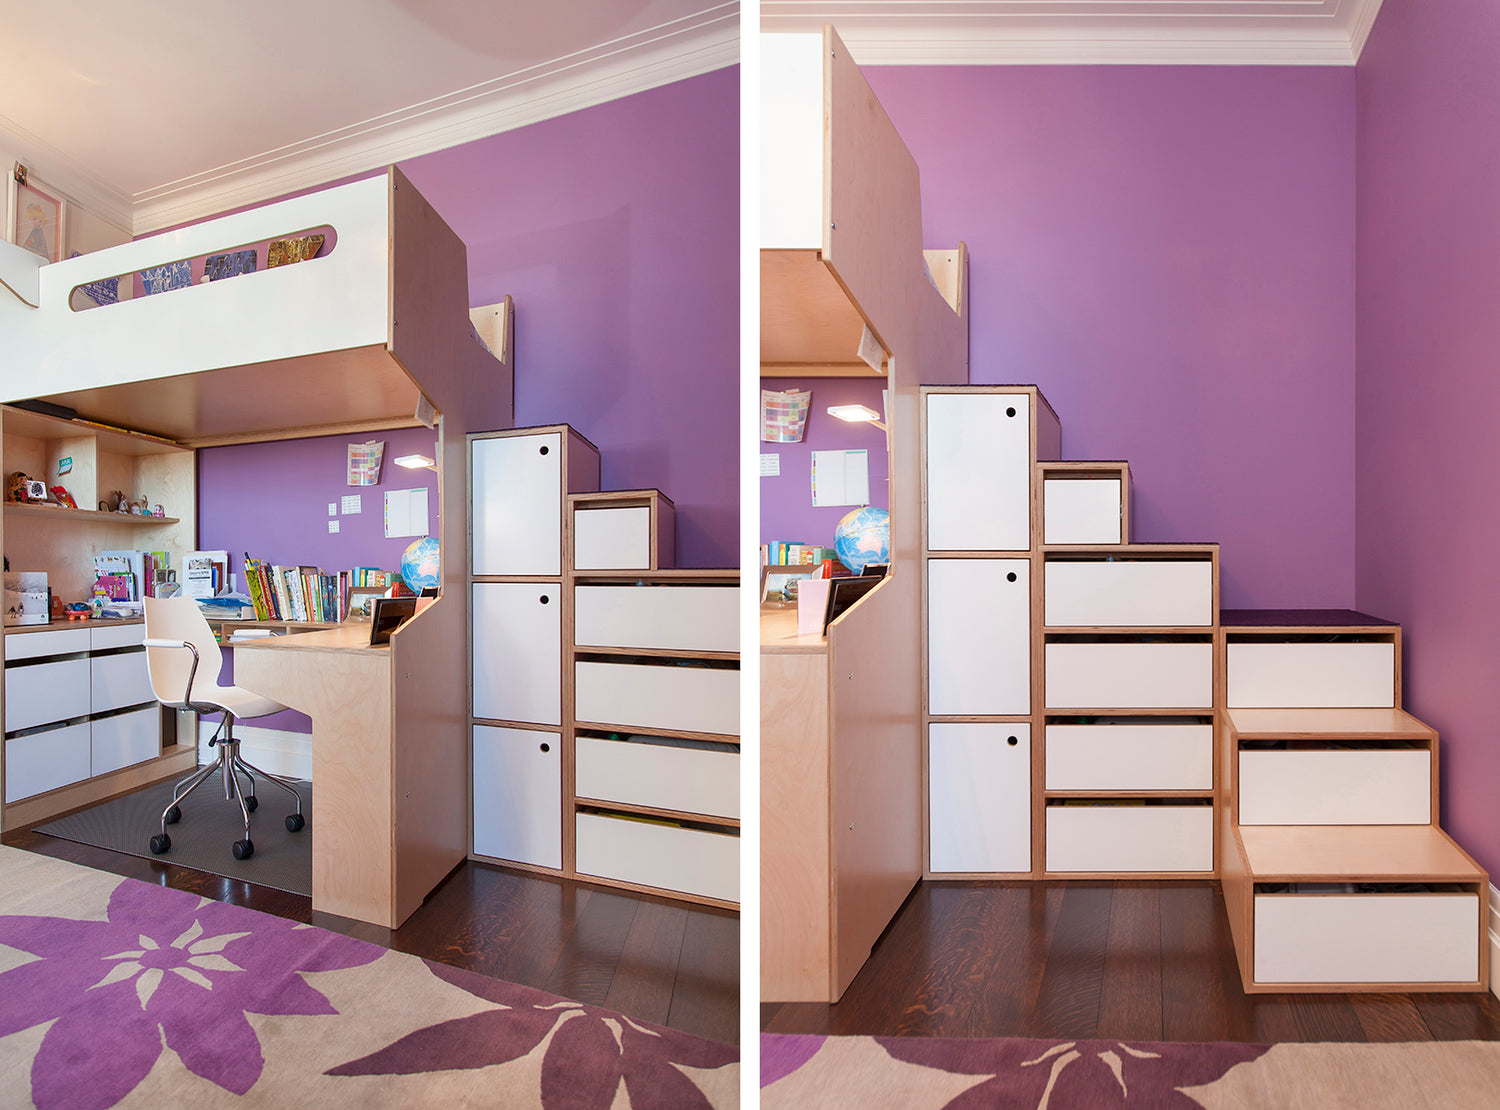 A purple room with white modular stairs doubling as storage space.